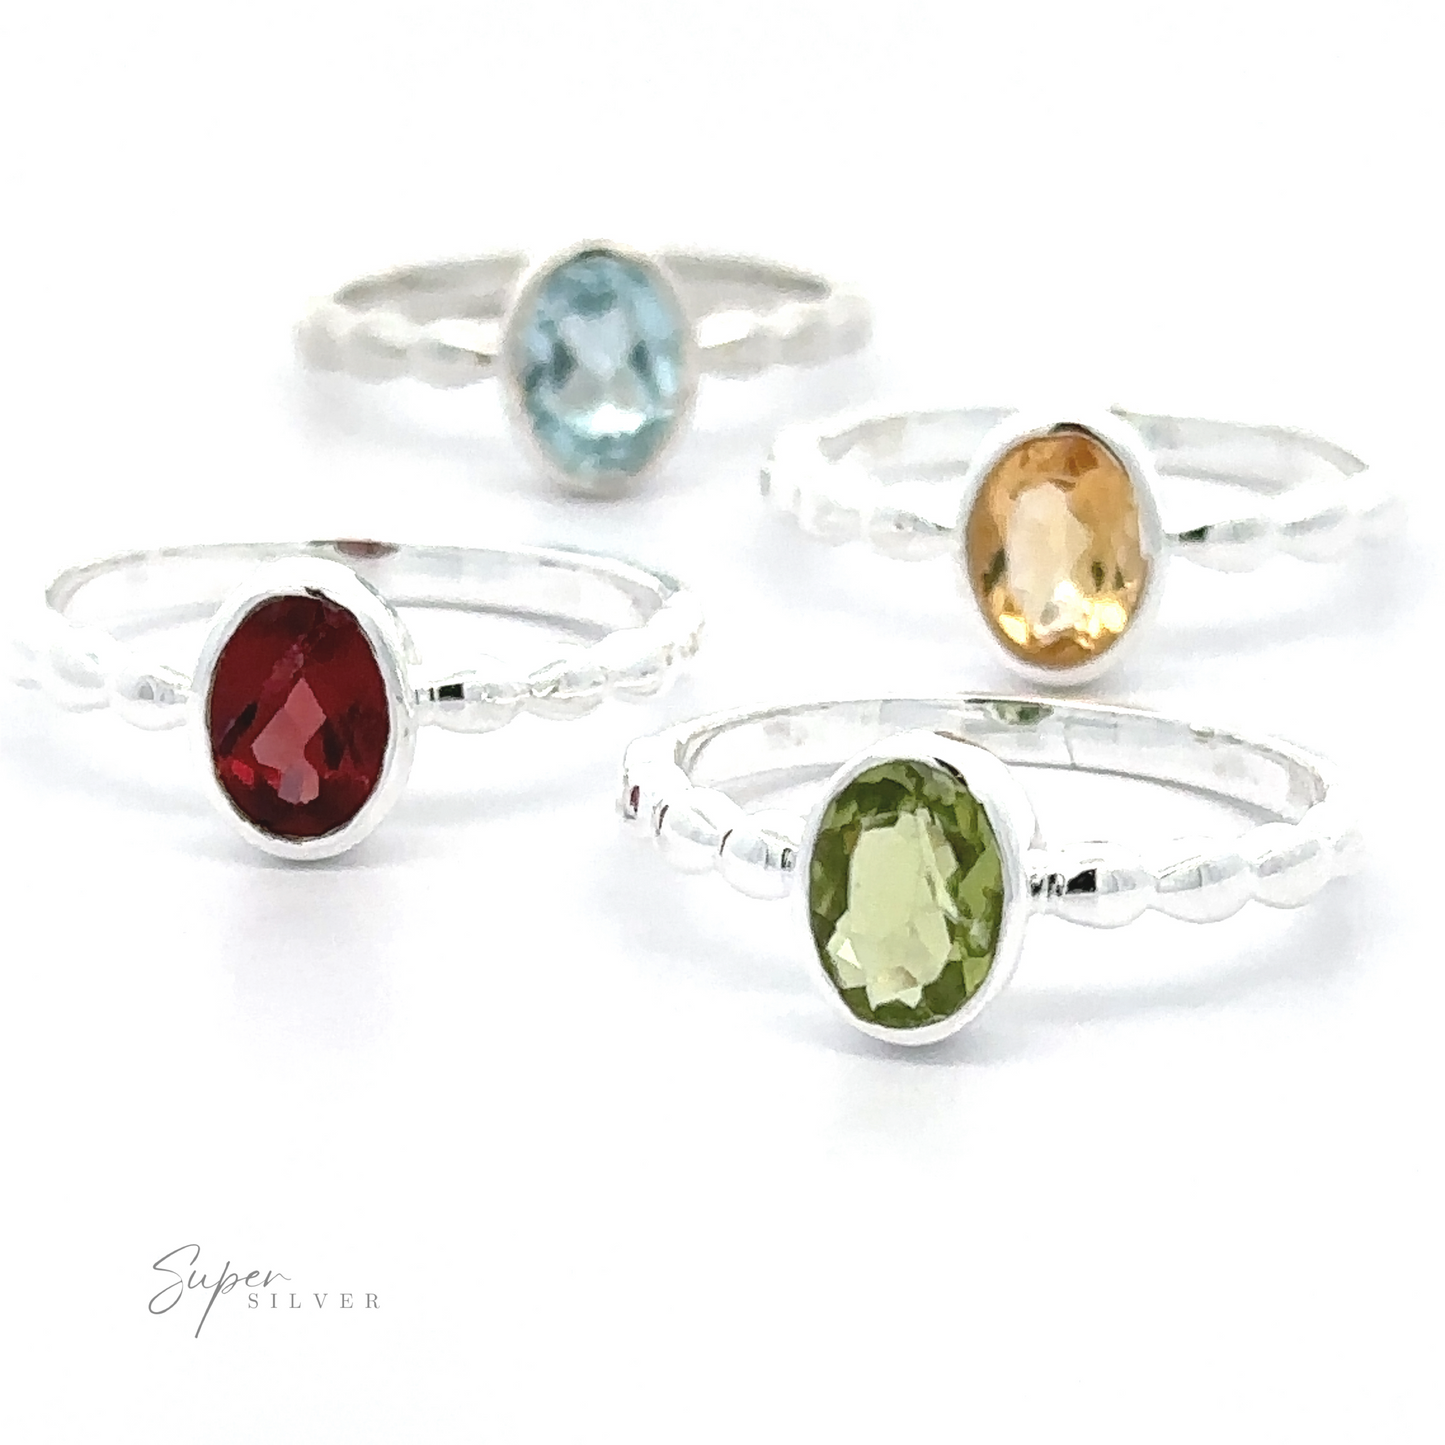 
                  
                    Four sterling silver Oval Gemstone Rings with Beaded Bands, each with a different colored oval gemstone (red, green, blue, yellow), arranged against a white background.
                  
                